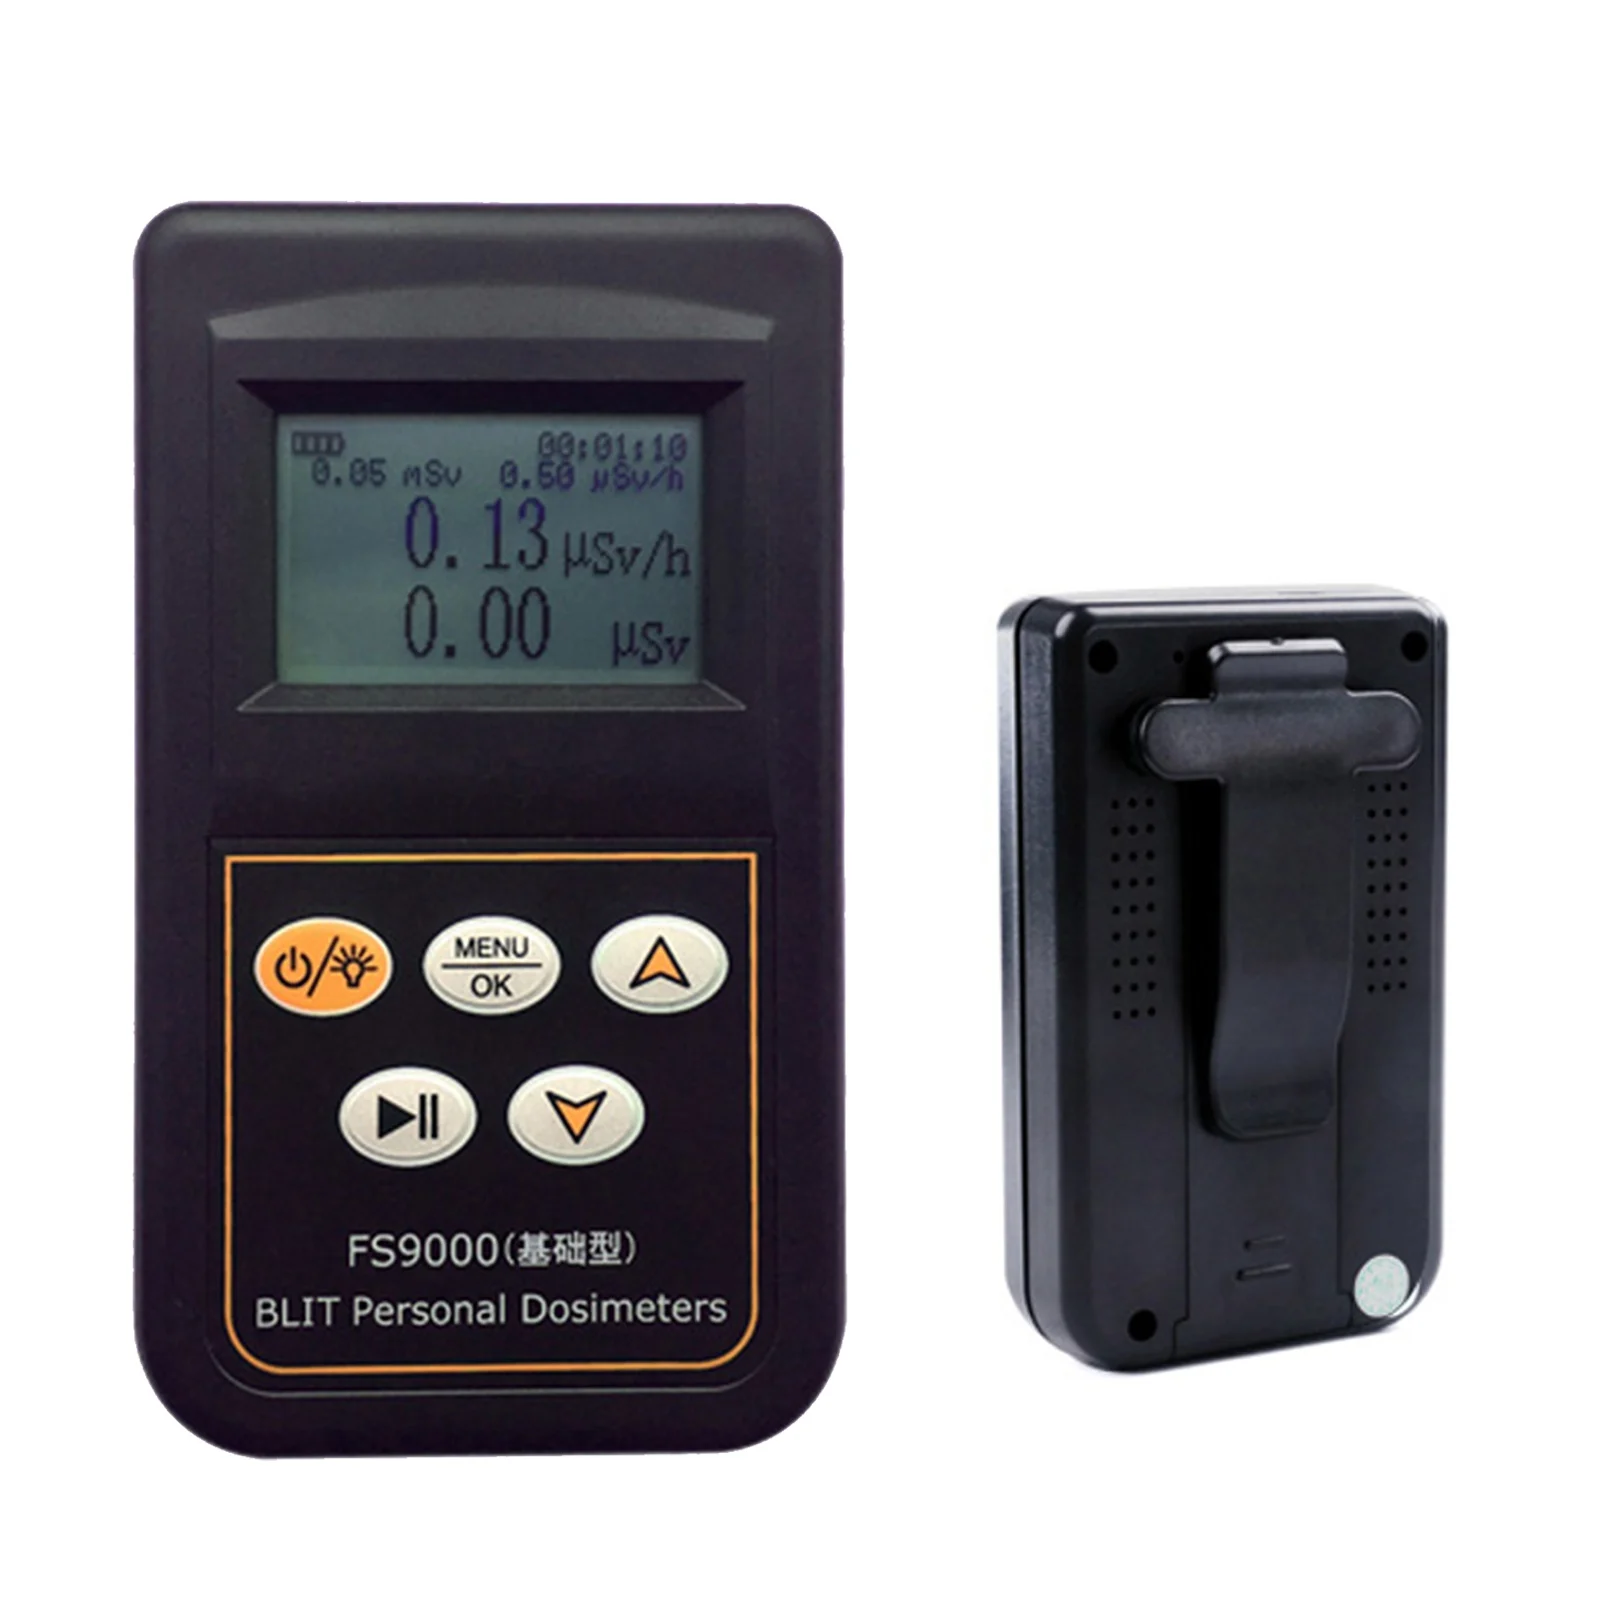 

Nuclear Radiation Detector Radioactive Marble Ionization Tester X-rays Y-rays Chinese English Language Black gaiger counter